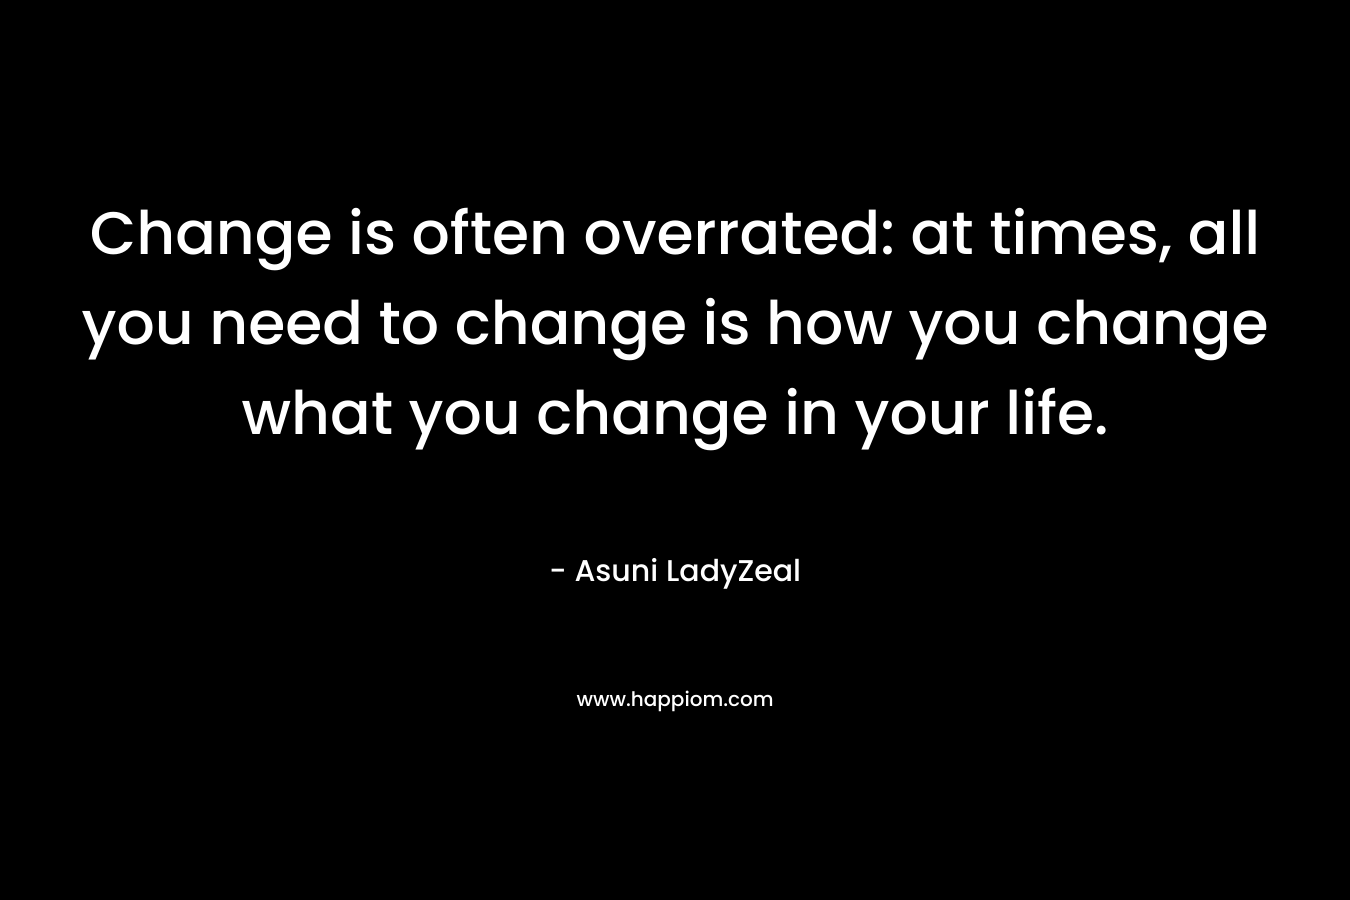 Change is often overrated: at times, all you need to change is how you change what you change in your life.